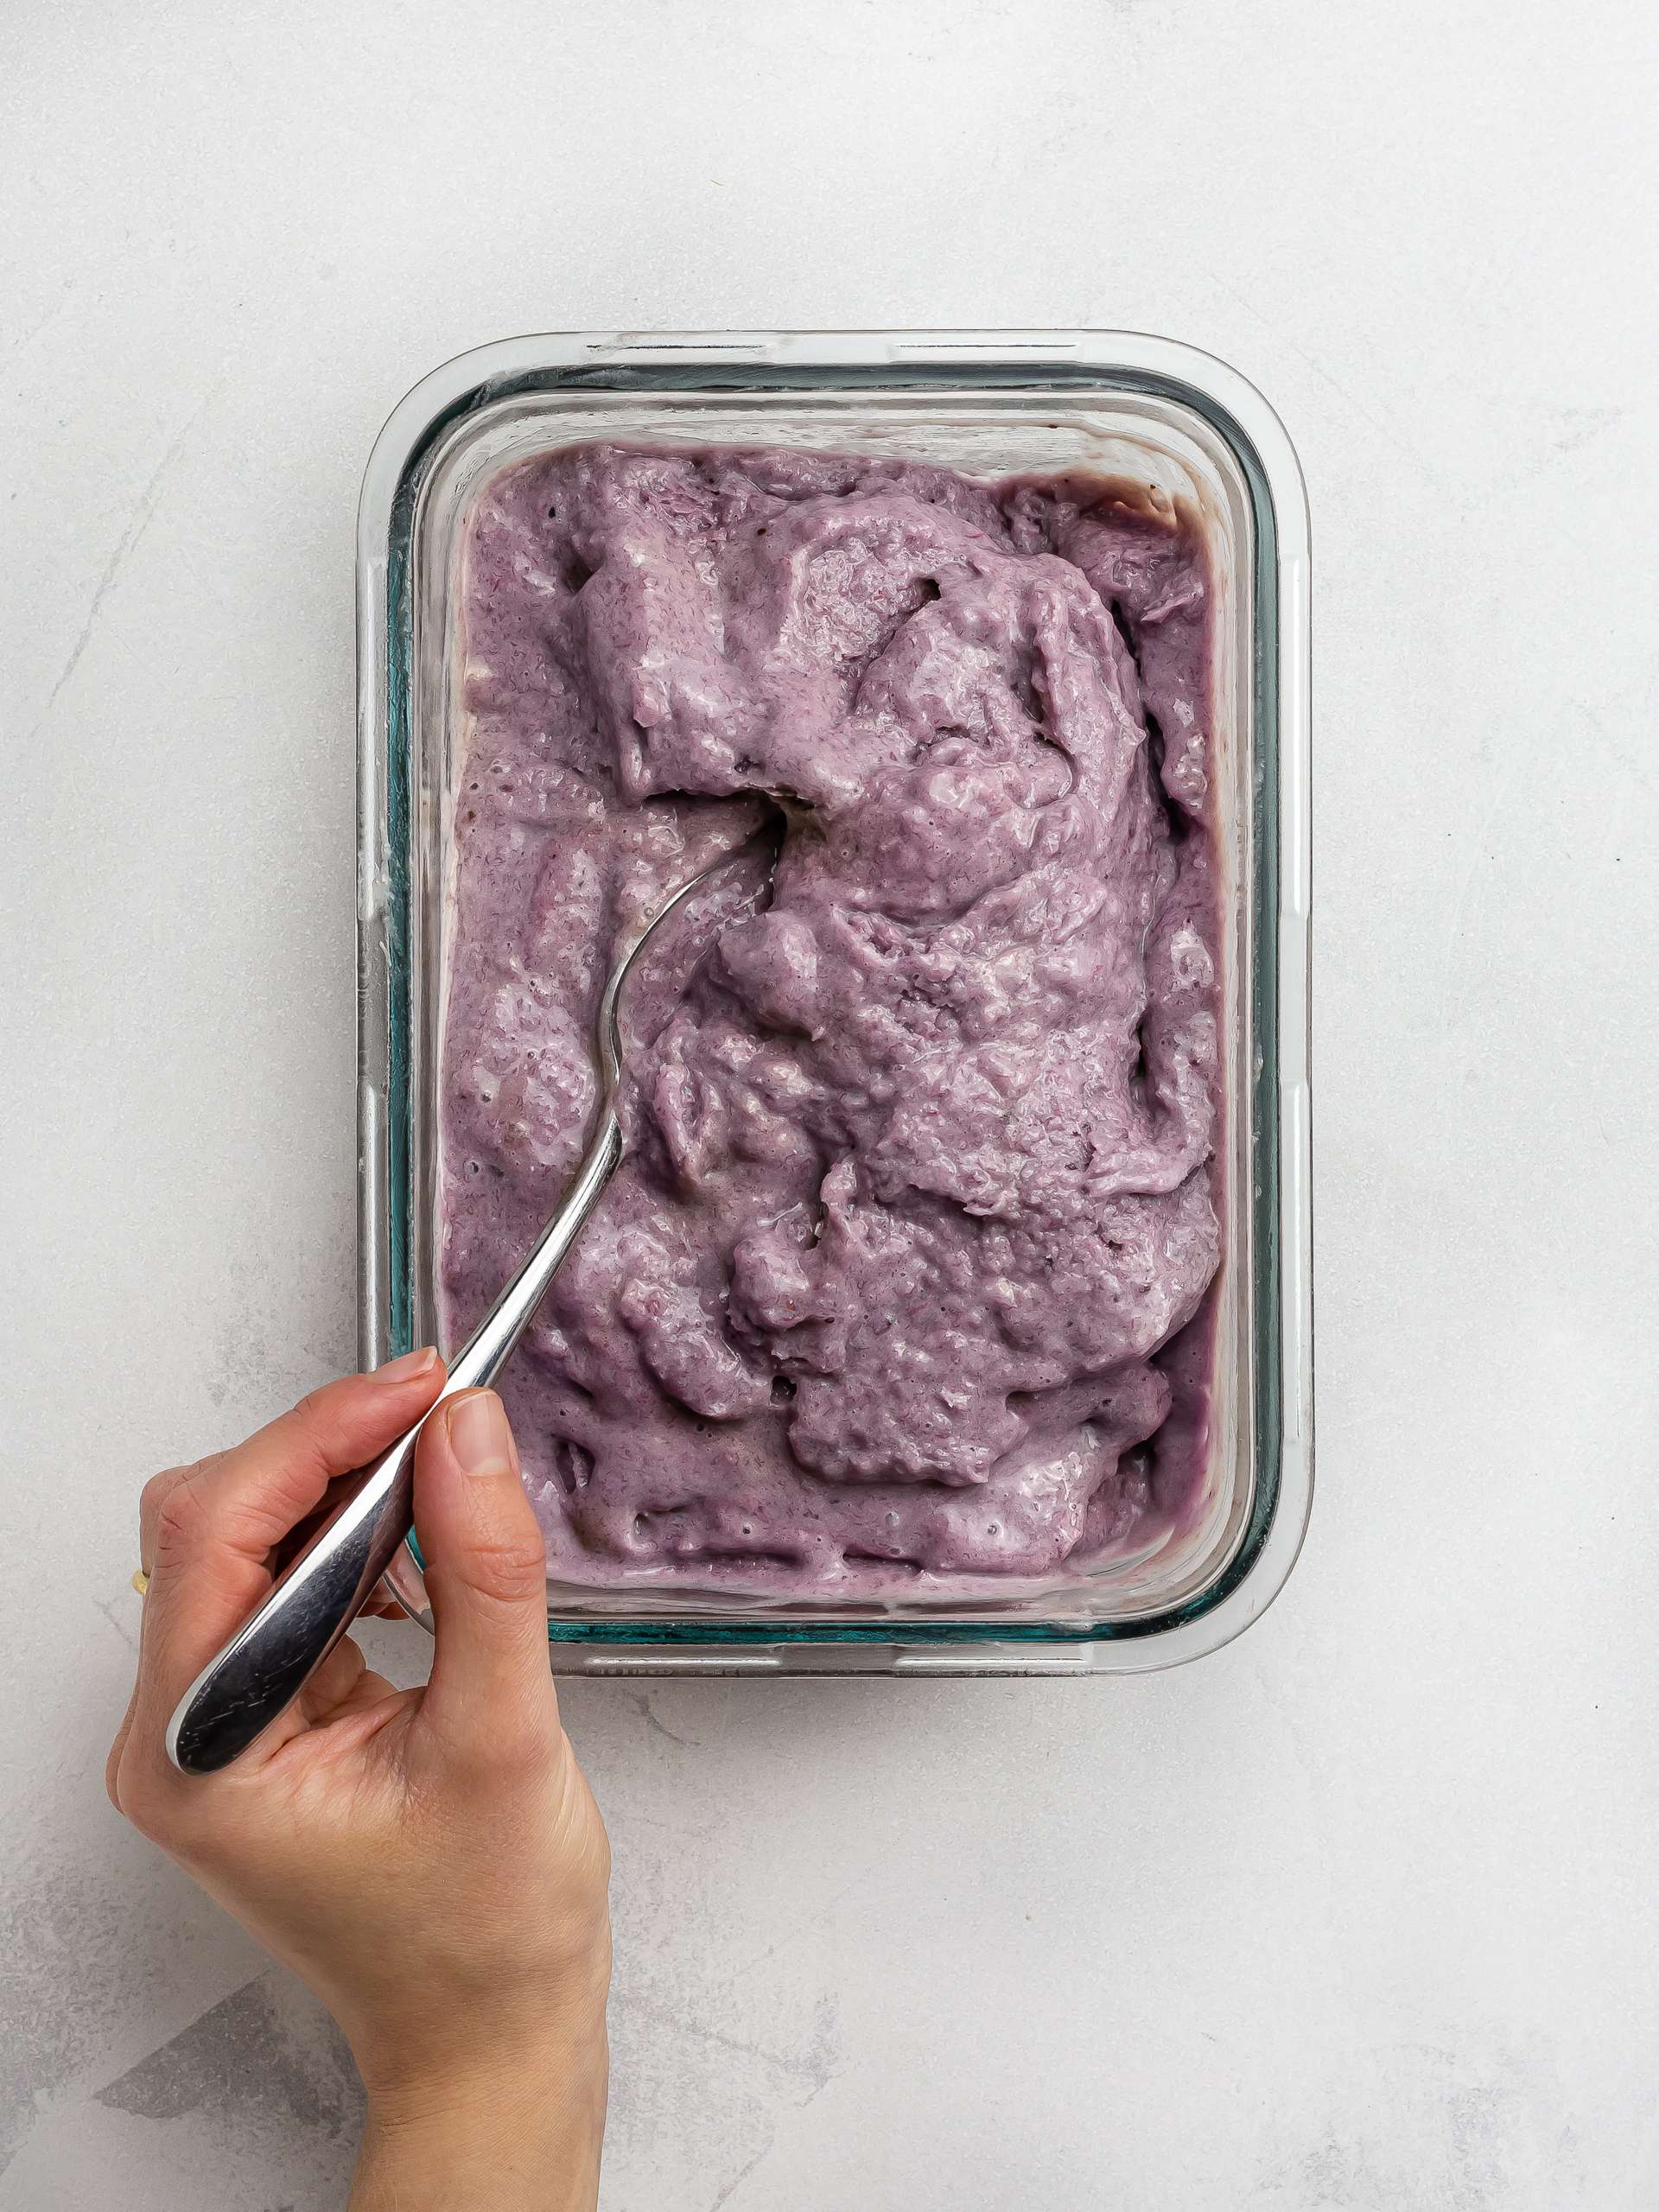 How to make lavender ice cream without a machine